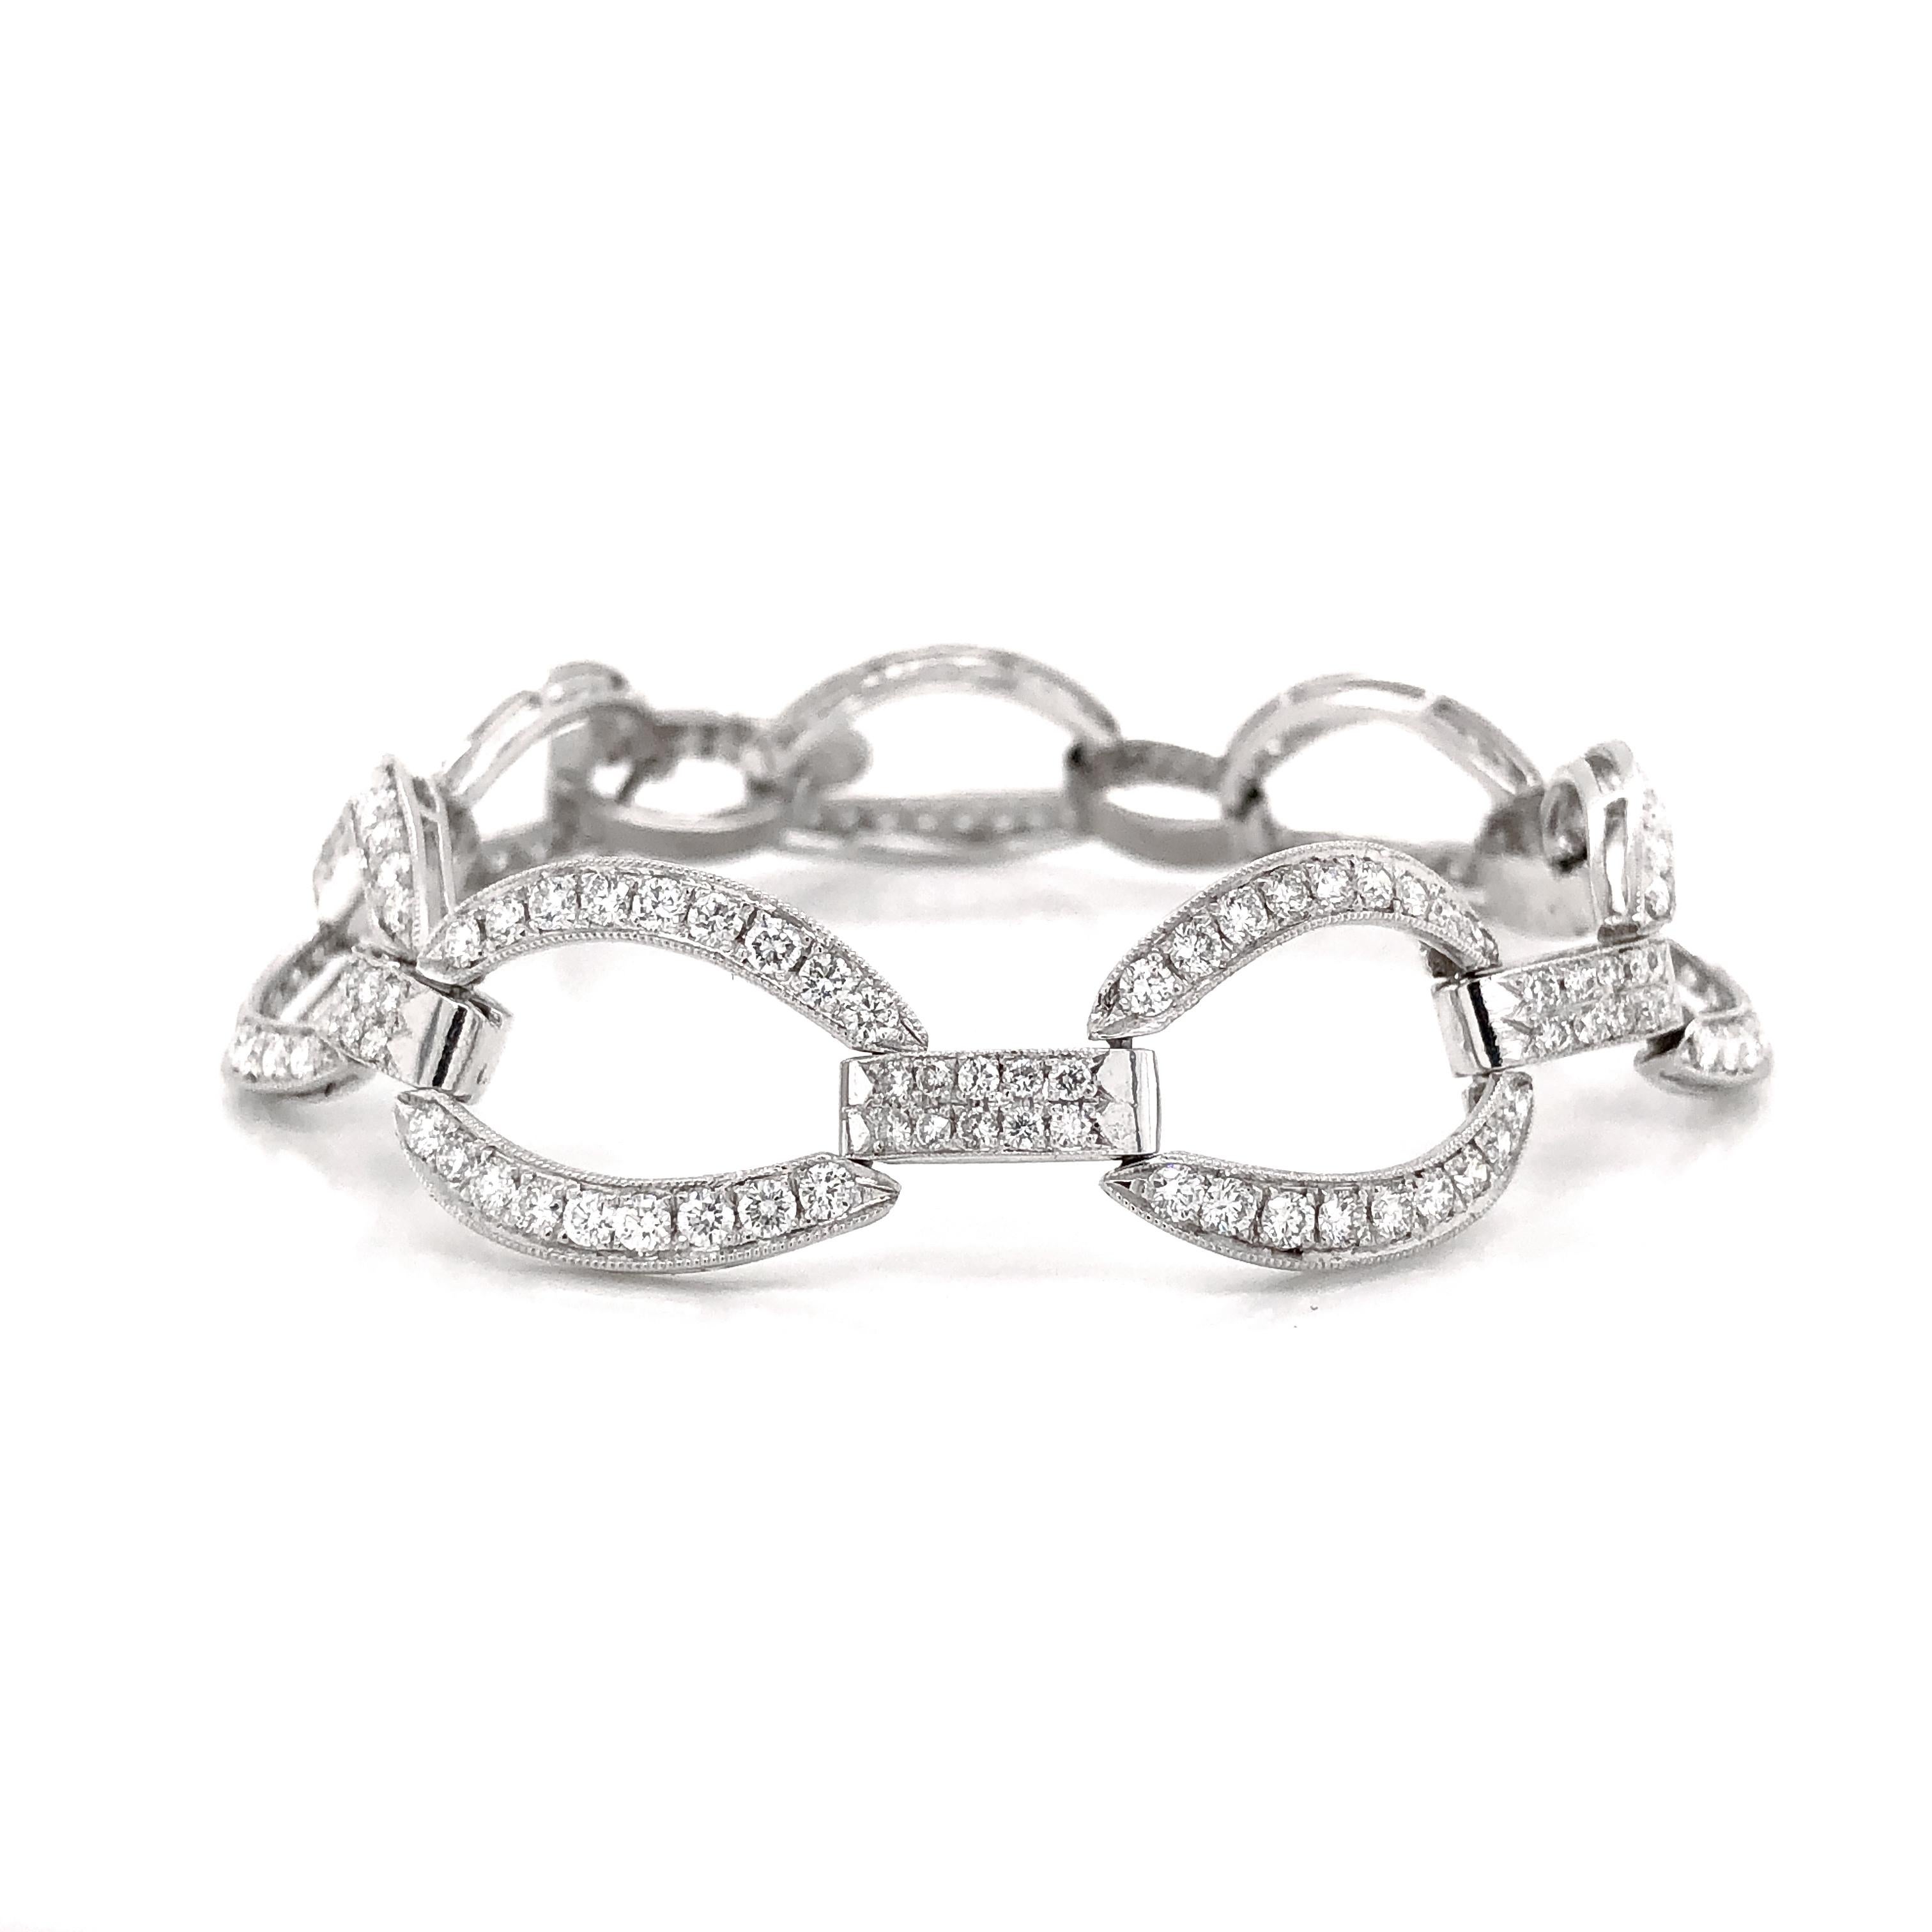 Art Deco Inspired Round Cut Diamonds 6.21 Carat Platinum Chain Bracelet In New Condition For Sale In New York, NY